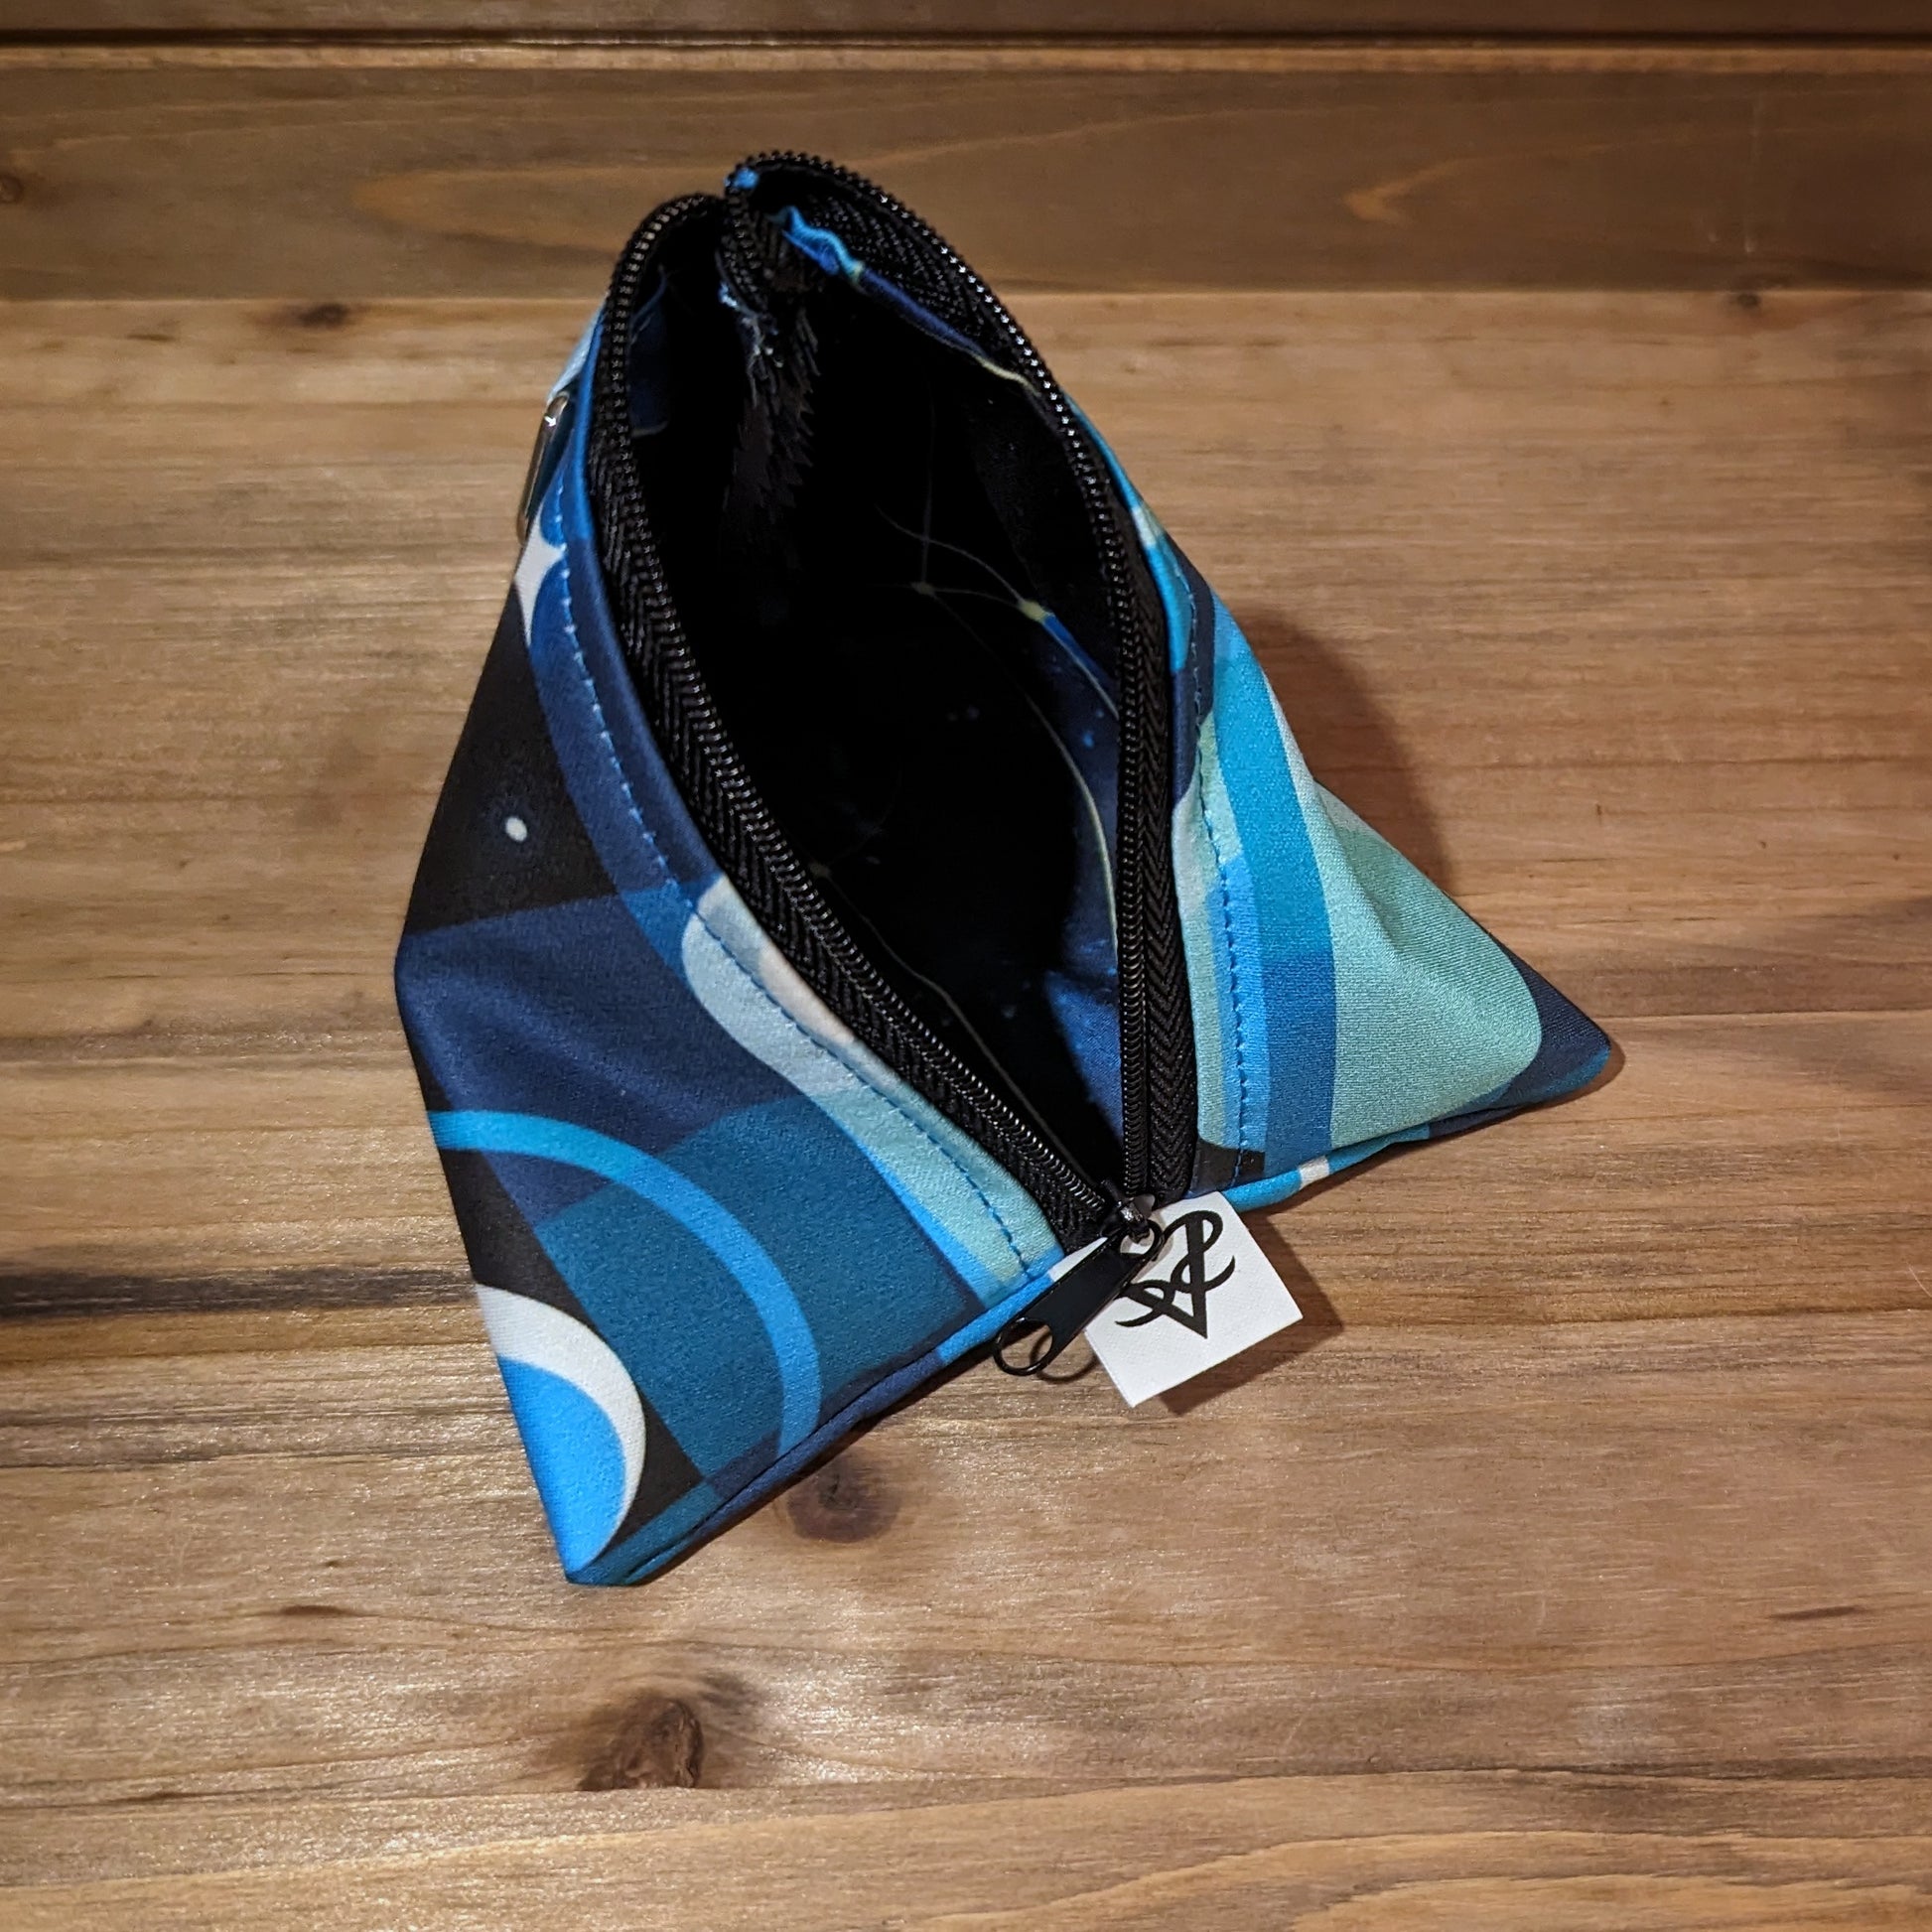 The Fractal Space D4 bag is open to show the stained glass style galaxy liner.